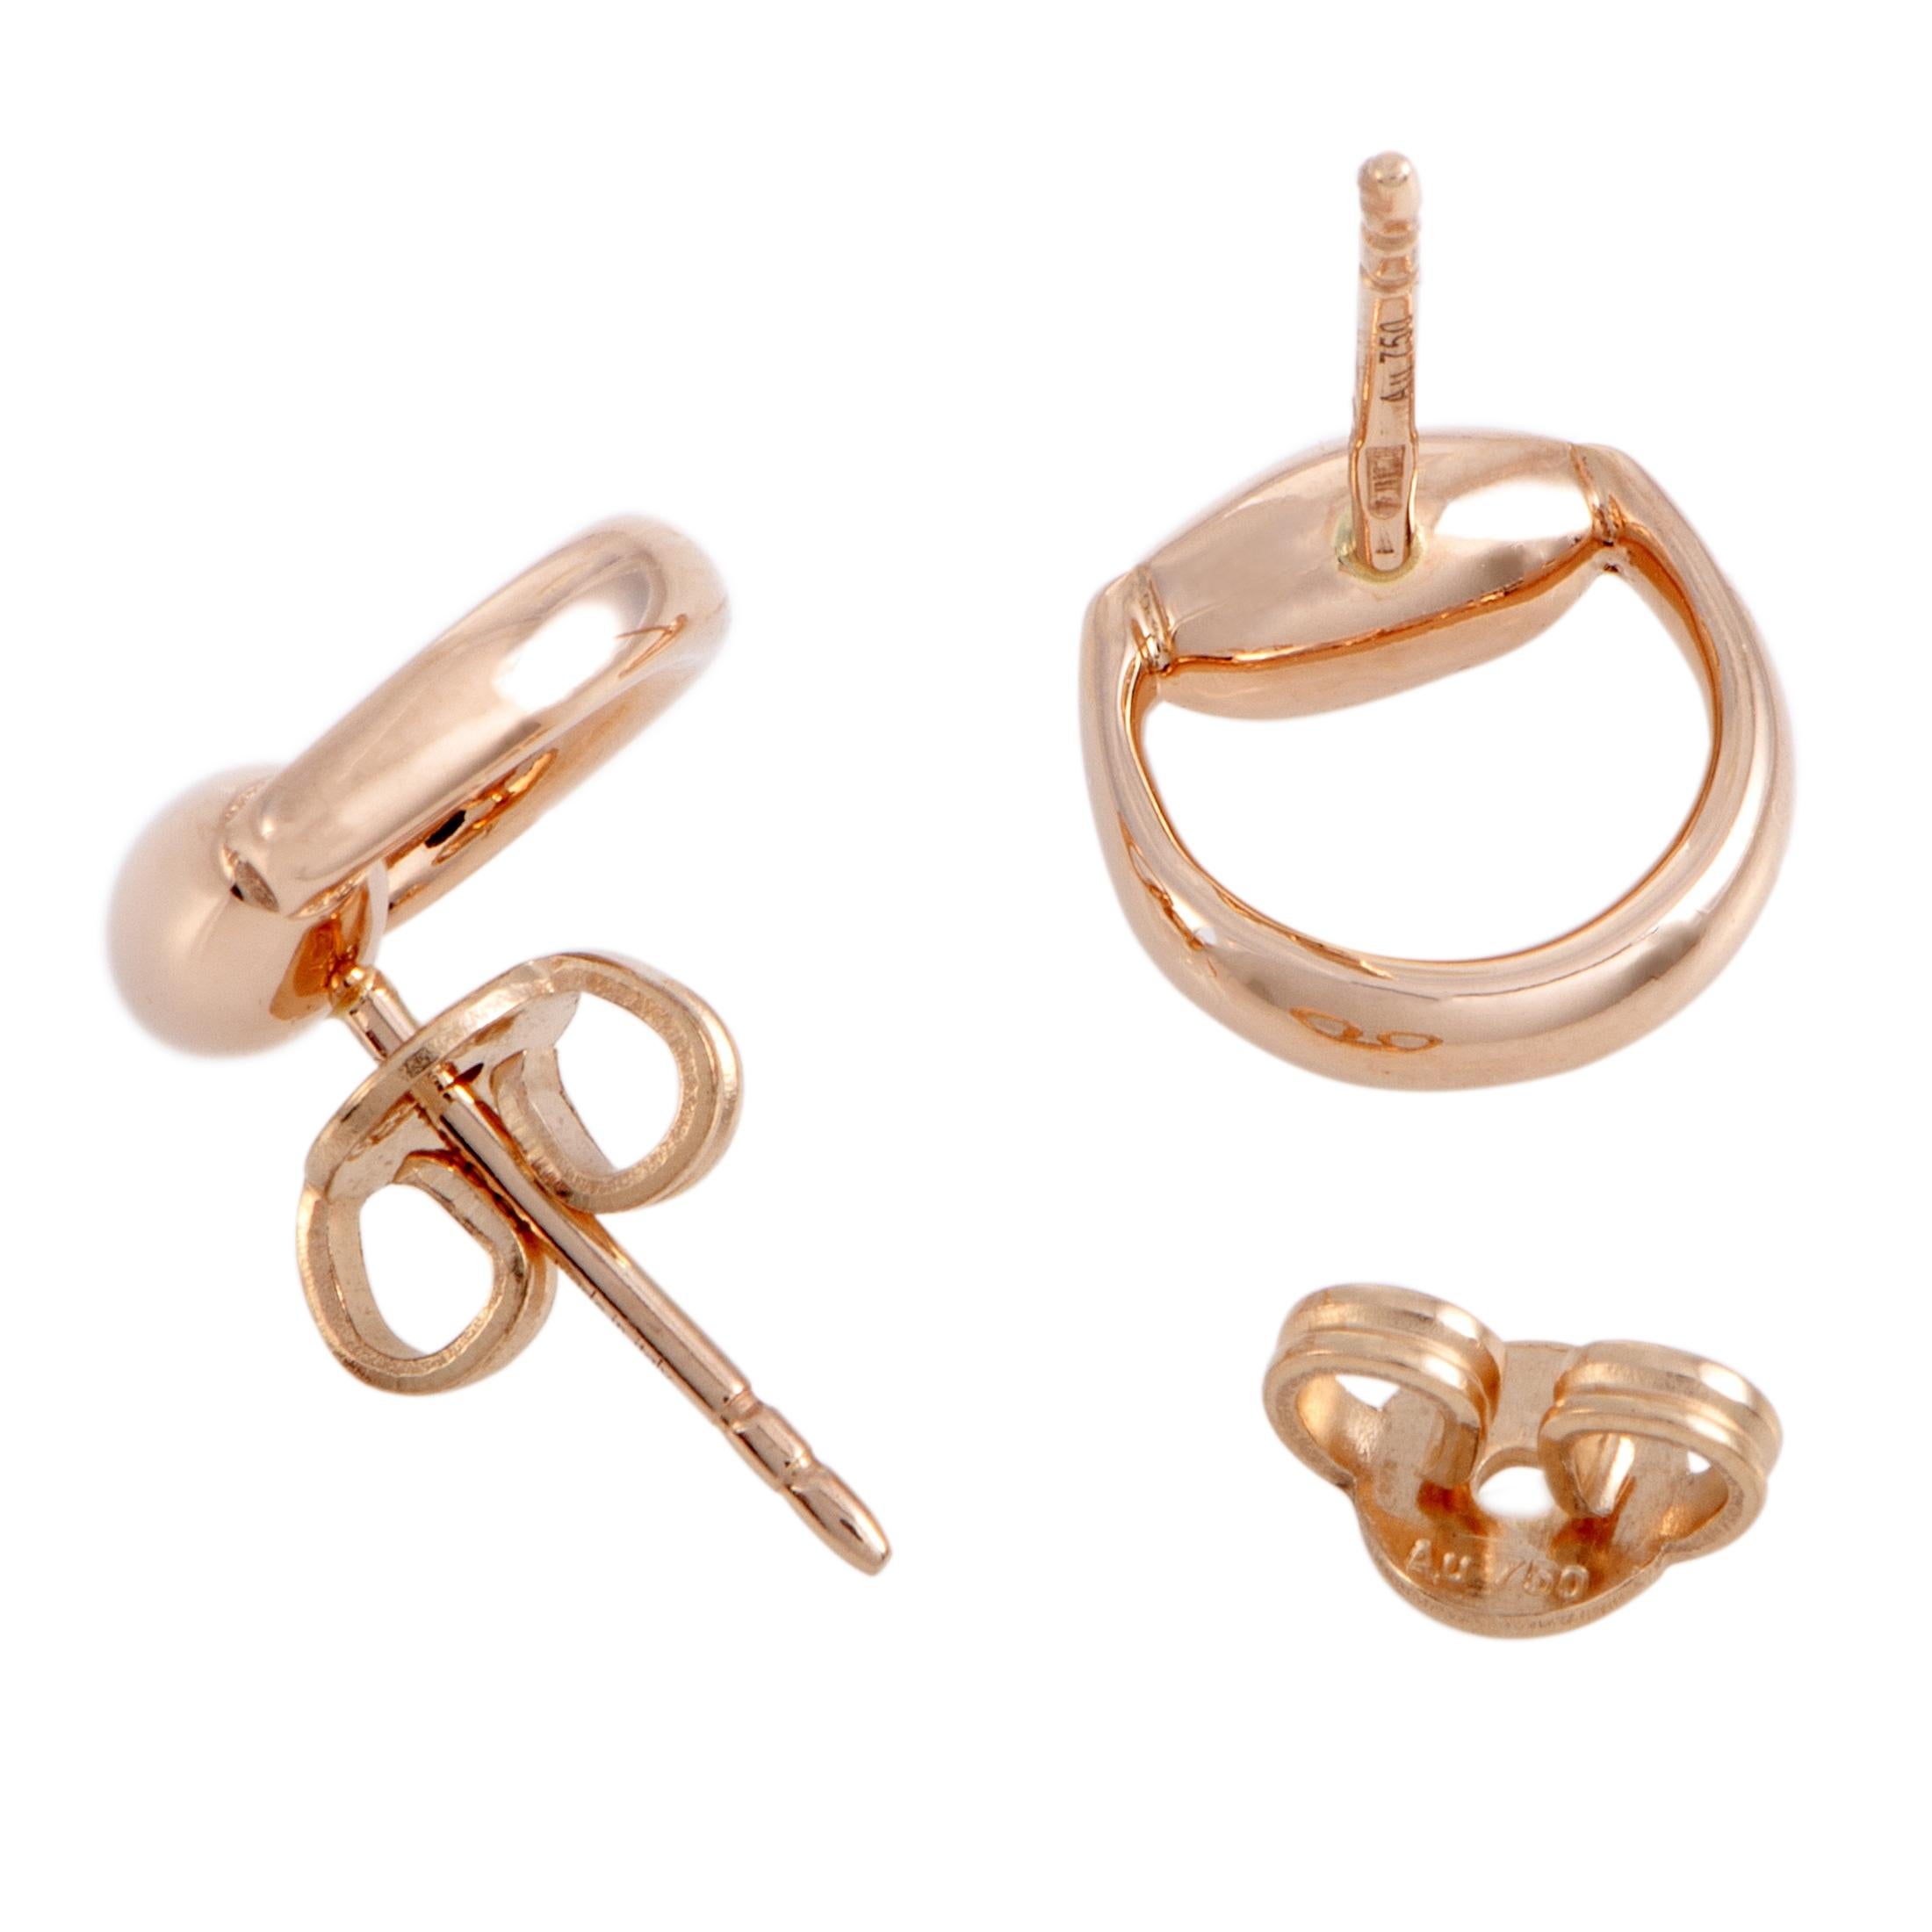 The Gucci “Horsebit” earrings are crafted from 18K rose gold and each of the two weighs 2 grams. The earrings measure 0.37” in length and 0.37” in width.
 
 Offered in brand new condition, this pair of earrings includes the manufacturer’s box and